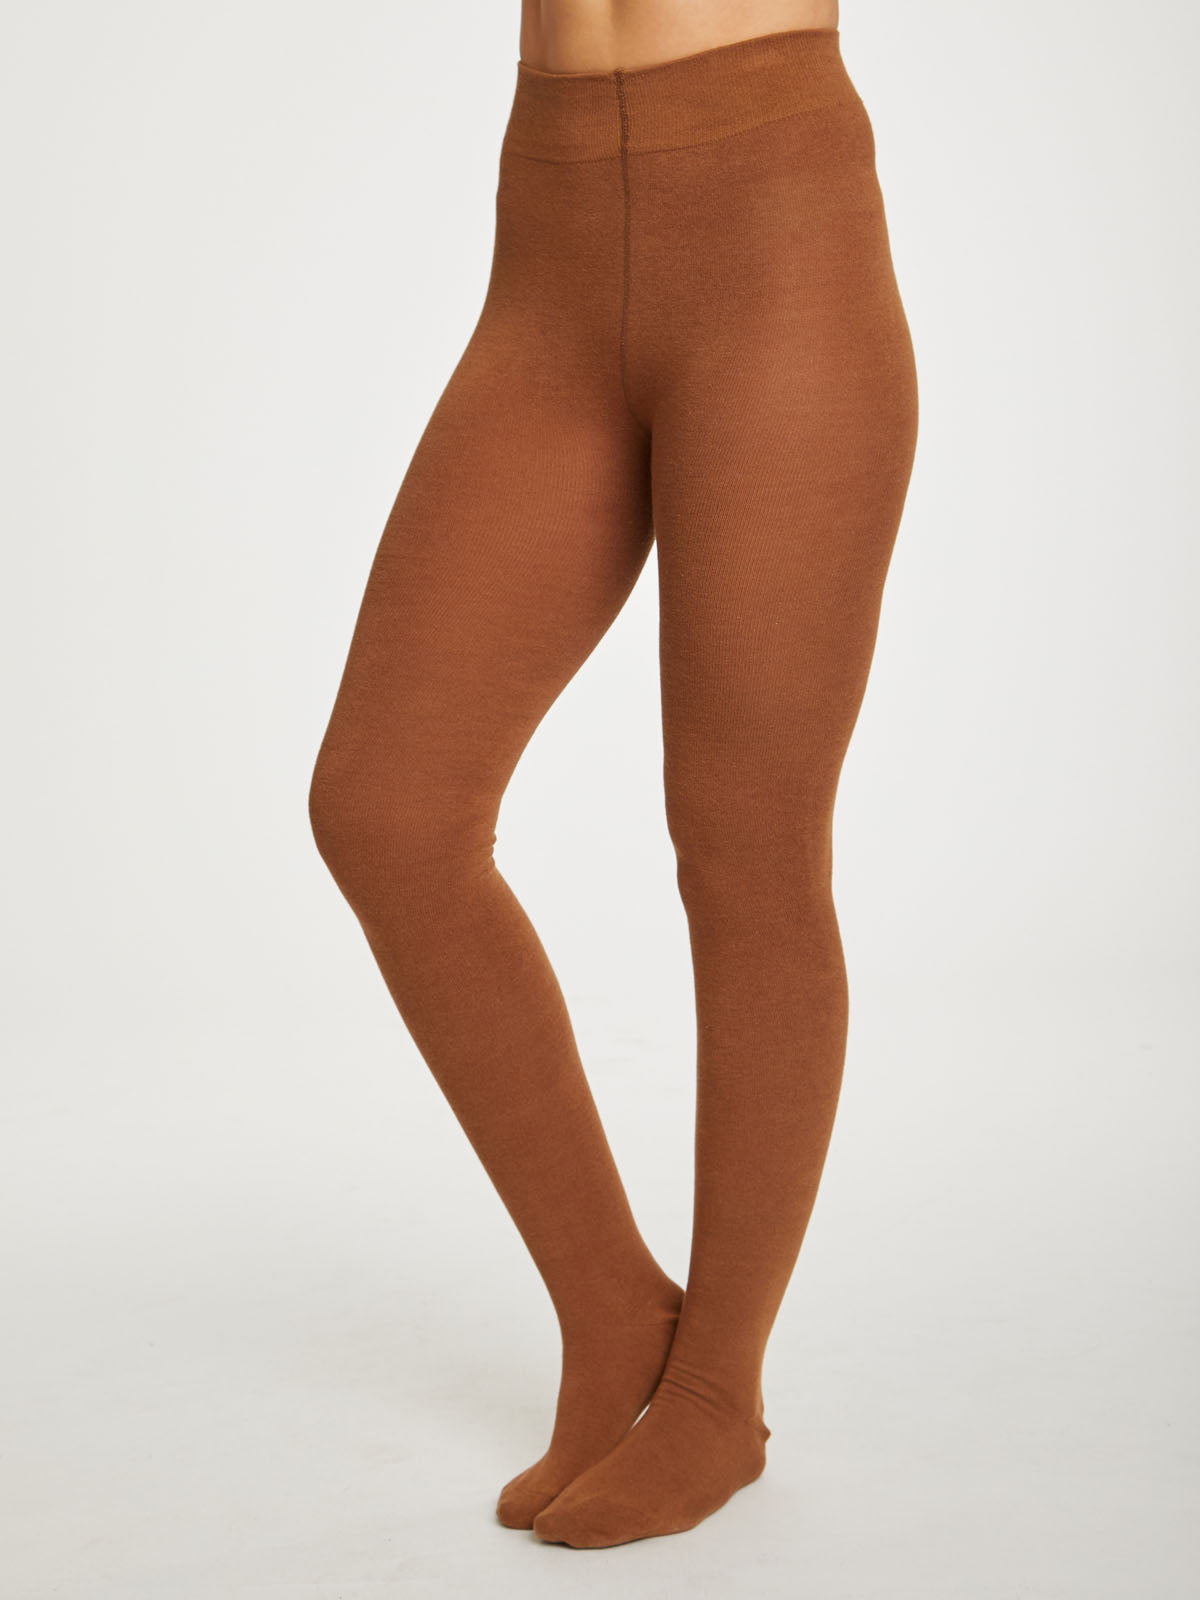 Women's Blissfully Soft Bamboo Tights in Toffee - The Sockery